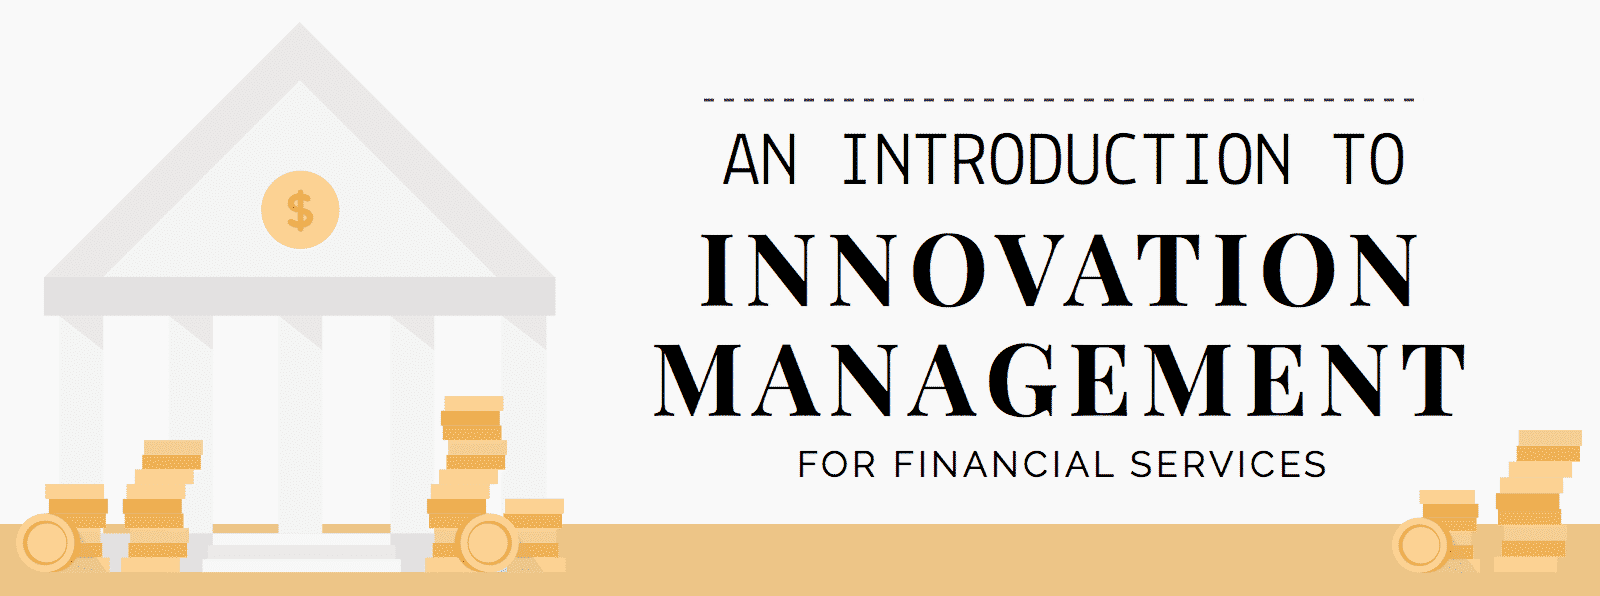 intro innovation management - Financial Services